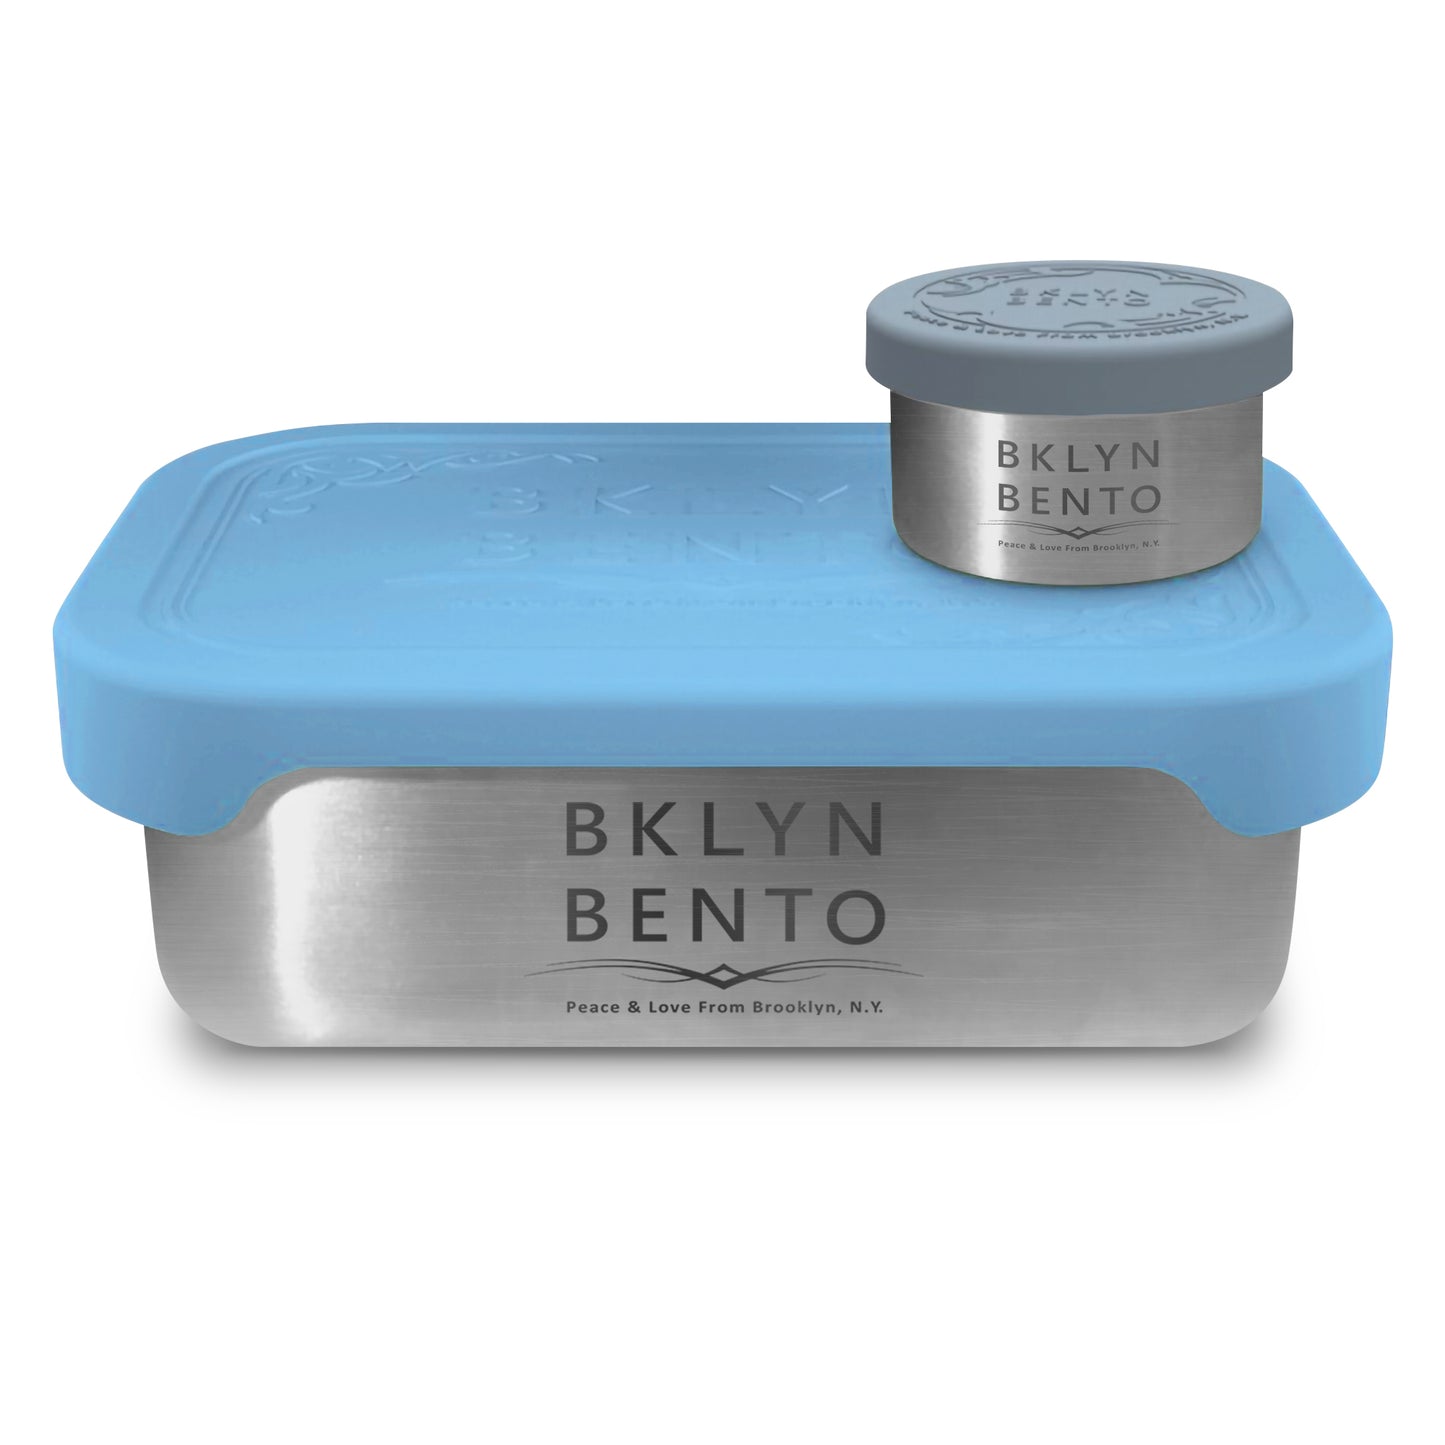 Bklyn Bento 2 Piece Set, Stainless Steel Metal Lunch Box + Condiment Container with Leakproof Lids (Blue)